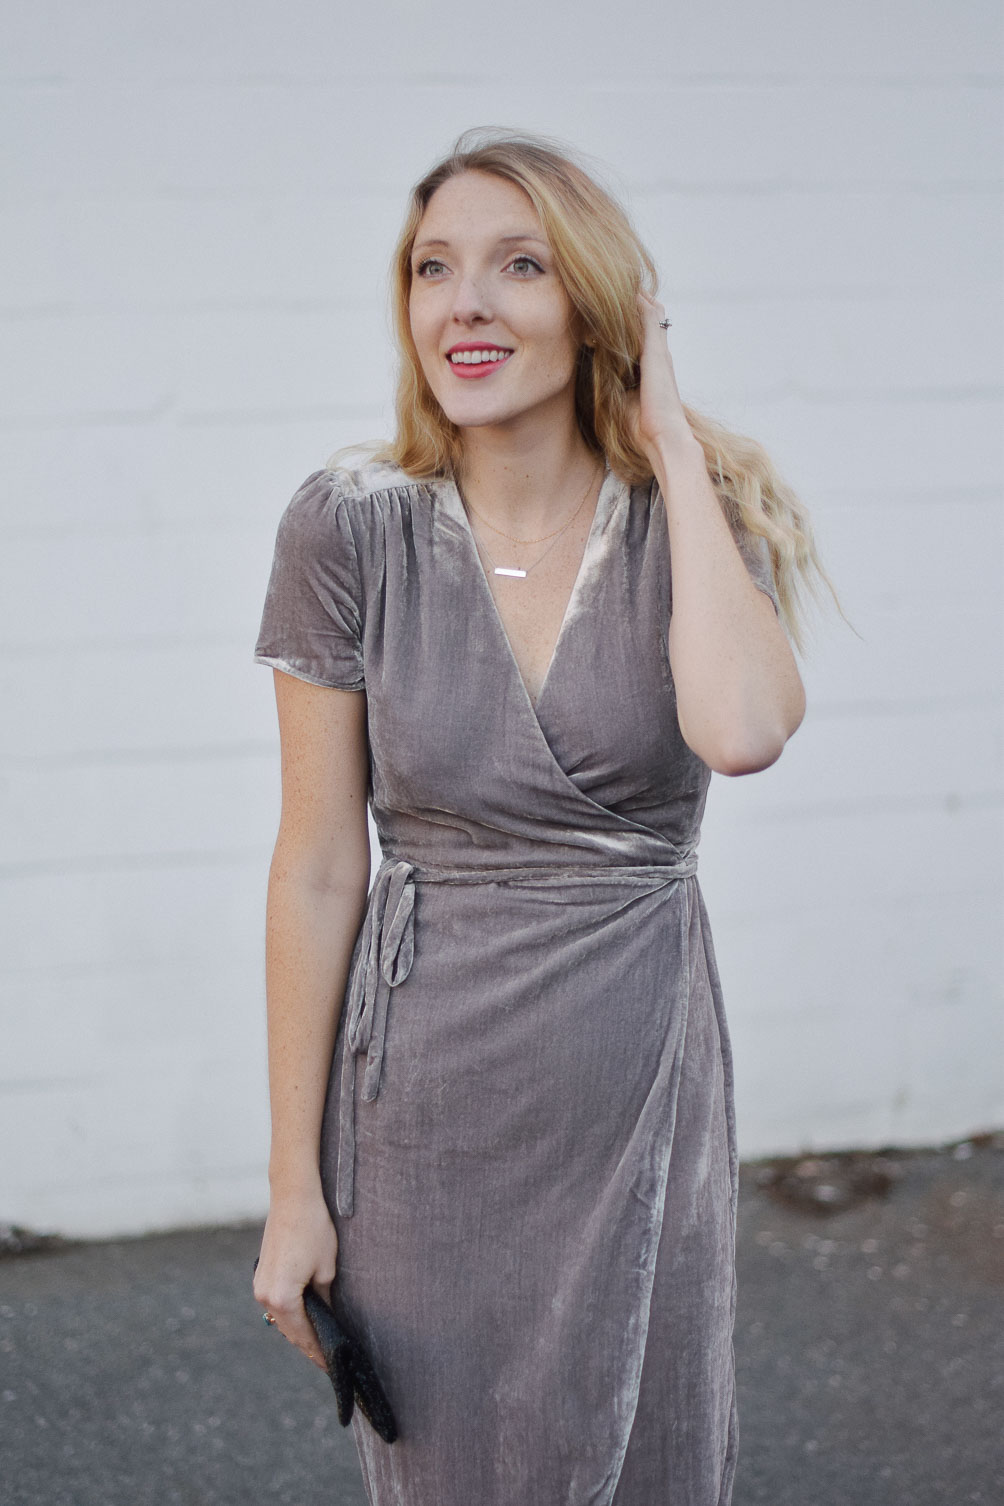 styling a metallic holiday dress party outfit with a beaded clutch